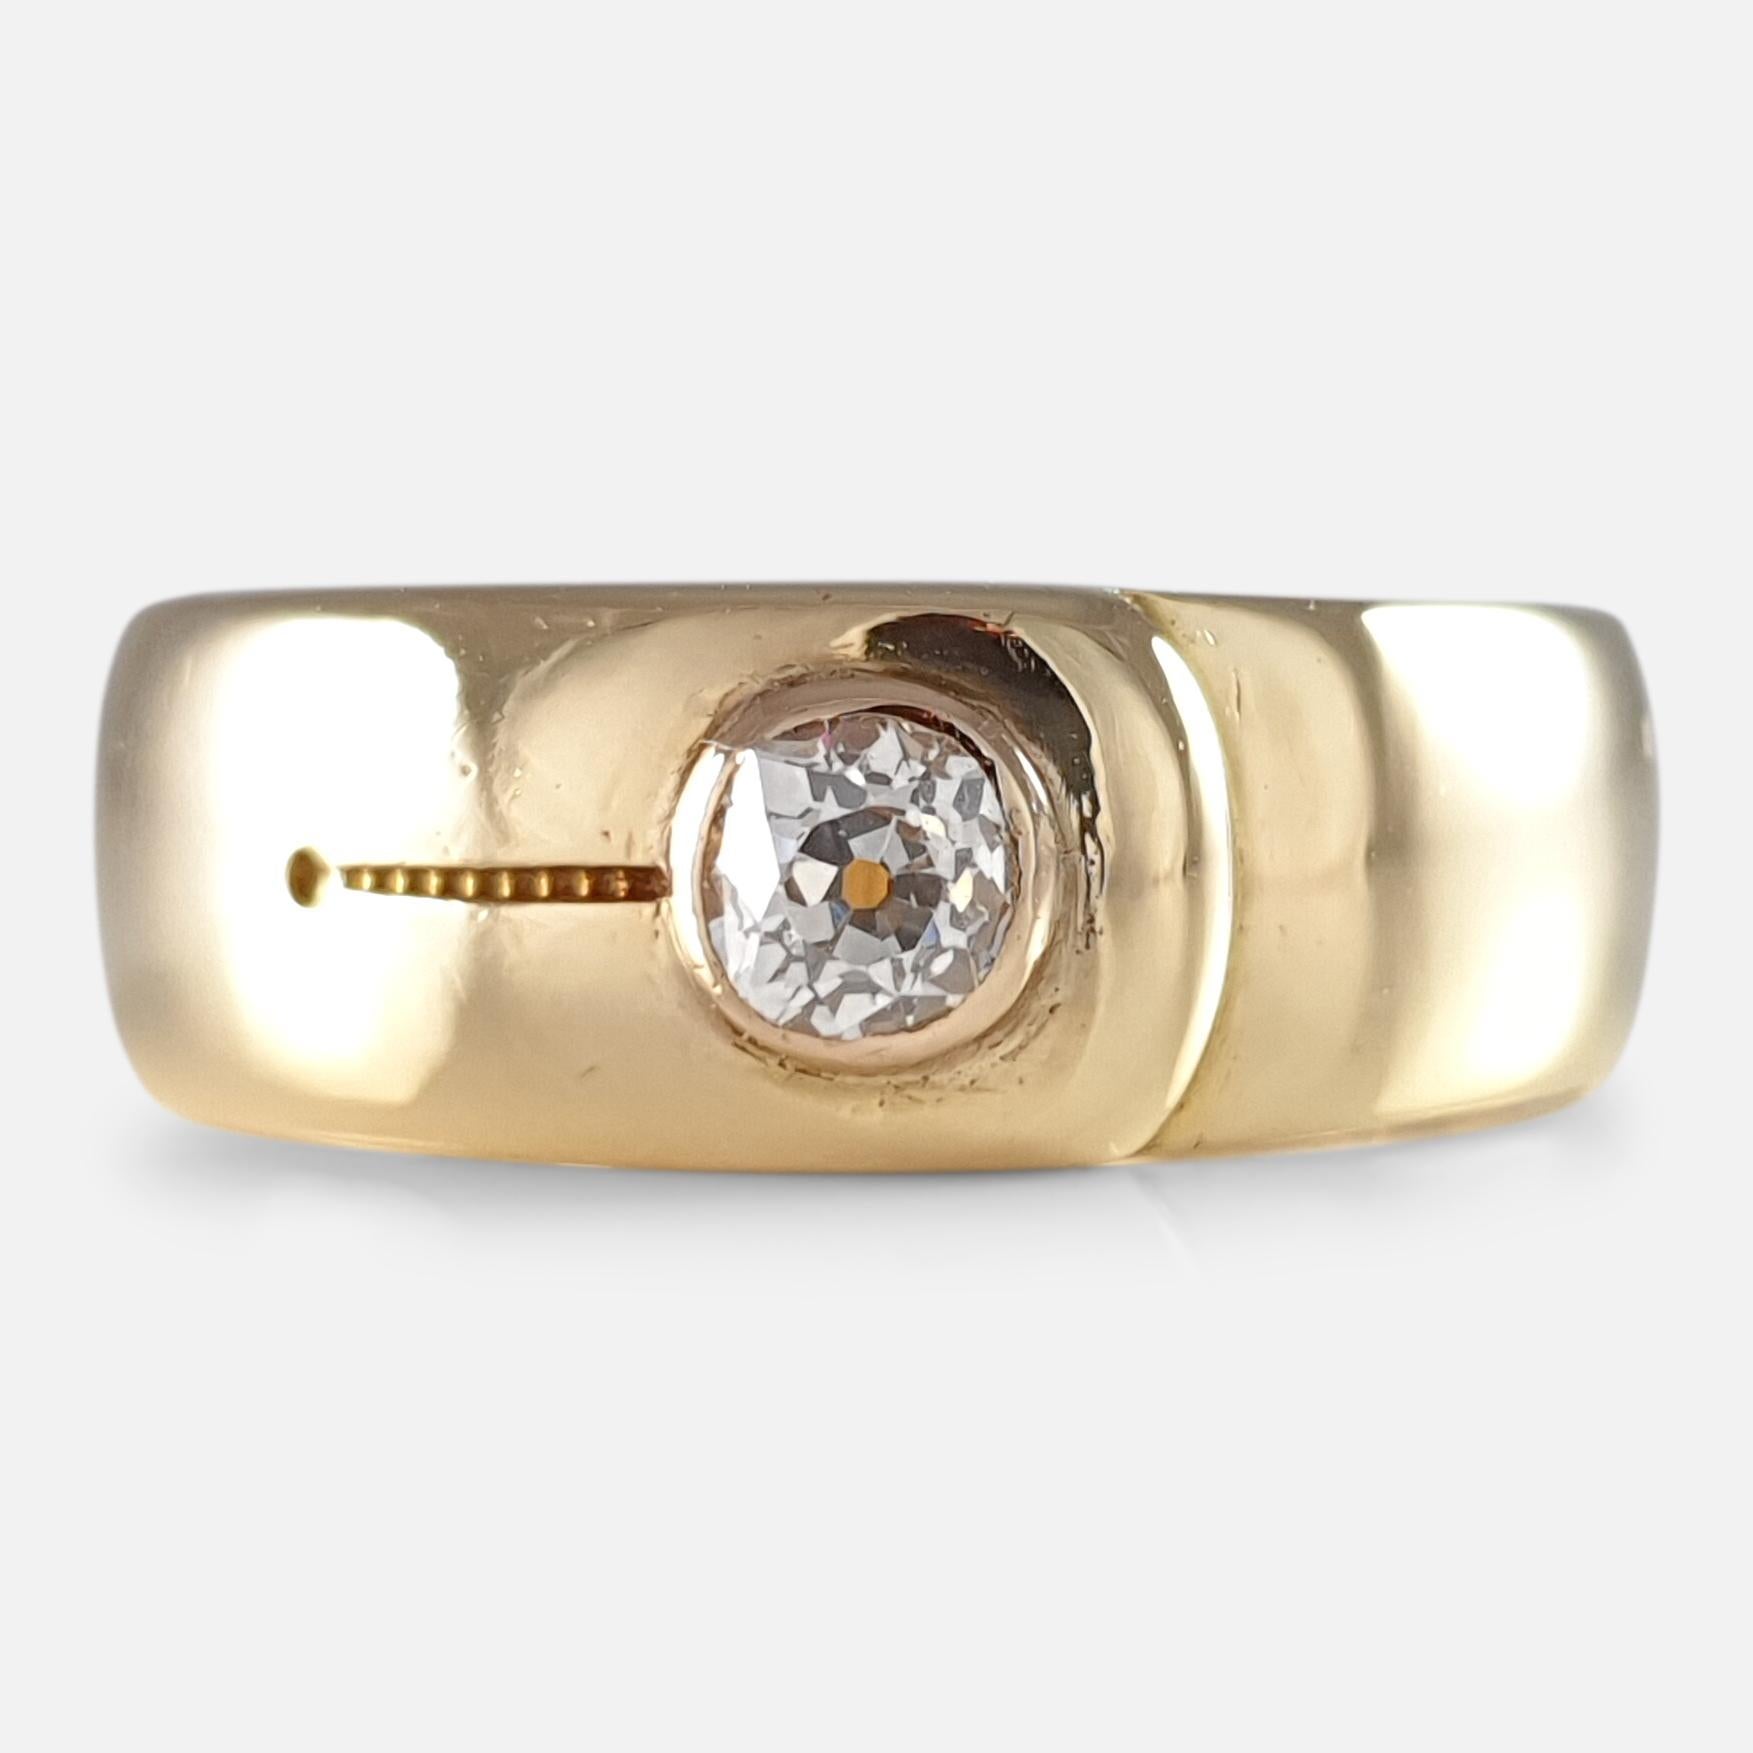 A Victorian 18 carat yellow gold and 0.30ct diamond buckle motif band ring.  

The ring is hallmarked with Chester assay office marks, stamped '18' to denote 18 karat (carat) gold, and the date stamp 'A' for 1884.

Date: - 1884.

Period: - Late 19th